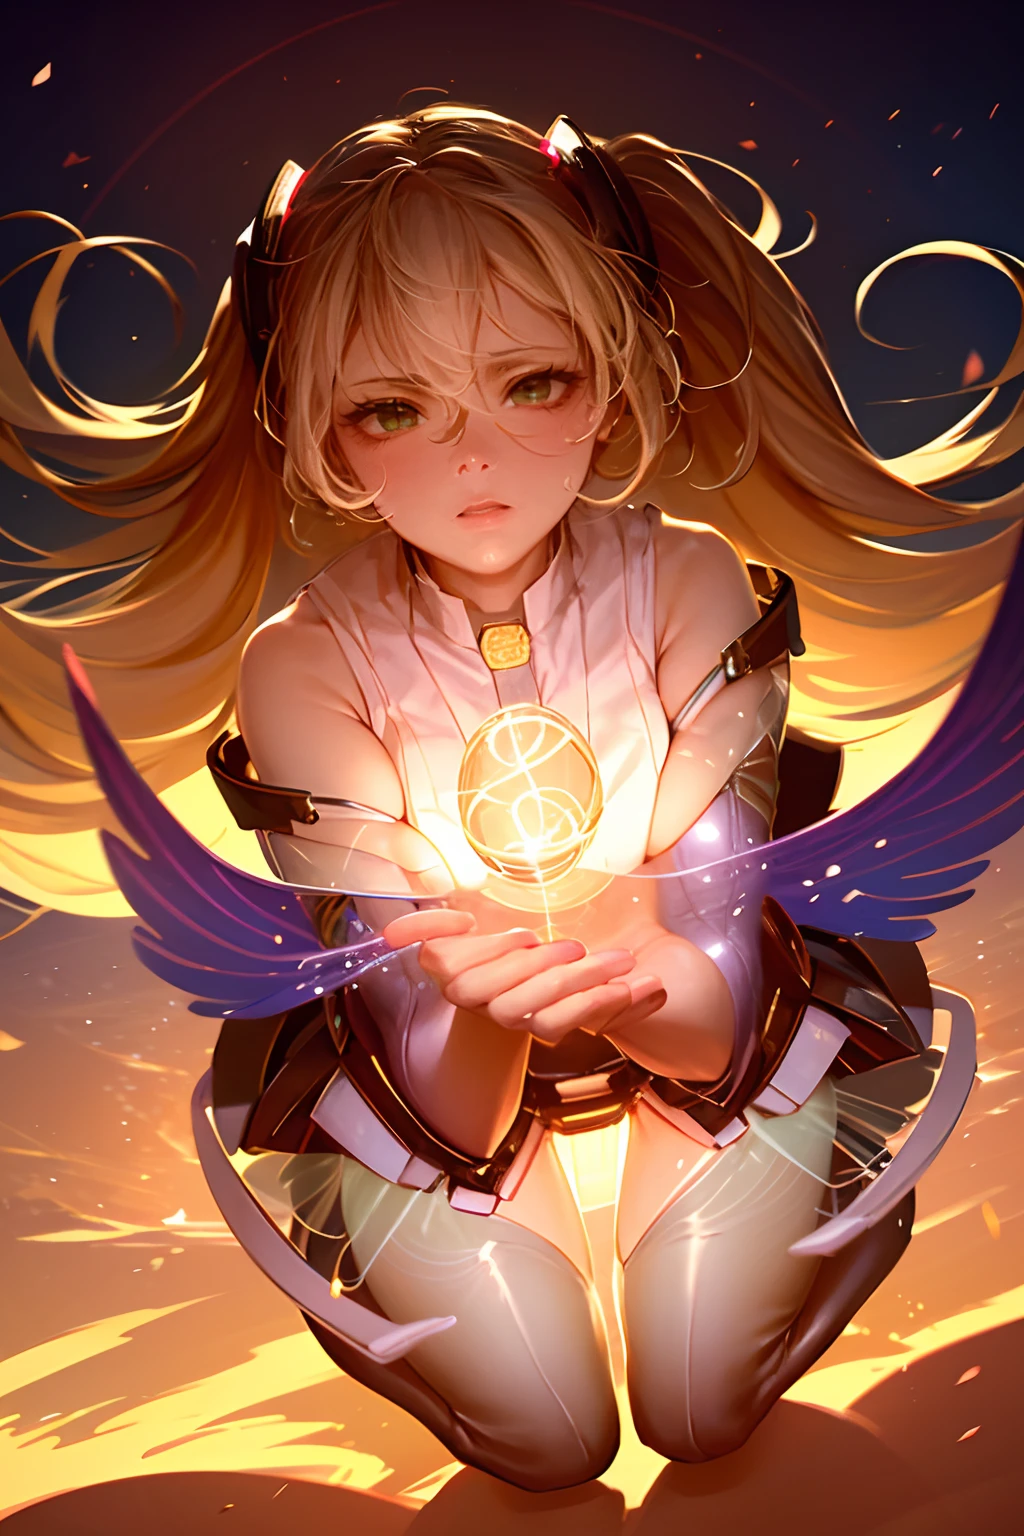 (Masterpiece:1.2), (The best quality:1.2), Perfect lighting, Dark Magician Girl casting a spell, Winking and blowing a kiss, his hands have magic, light, red, floating in the air, big boobs, open neckline, magic background,  From above, sparkles. magic wheel